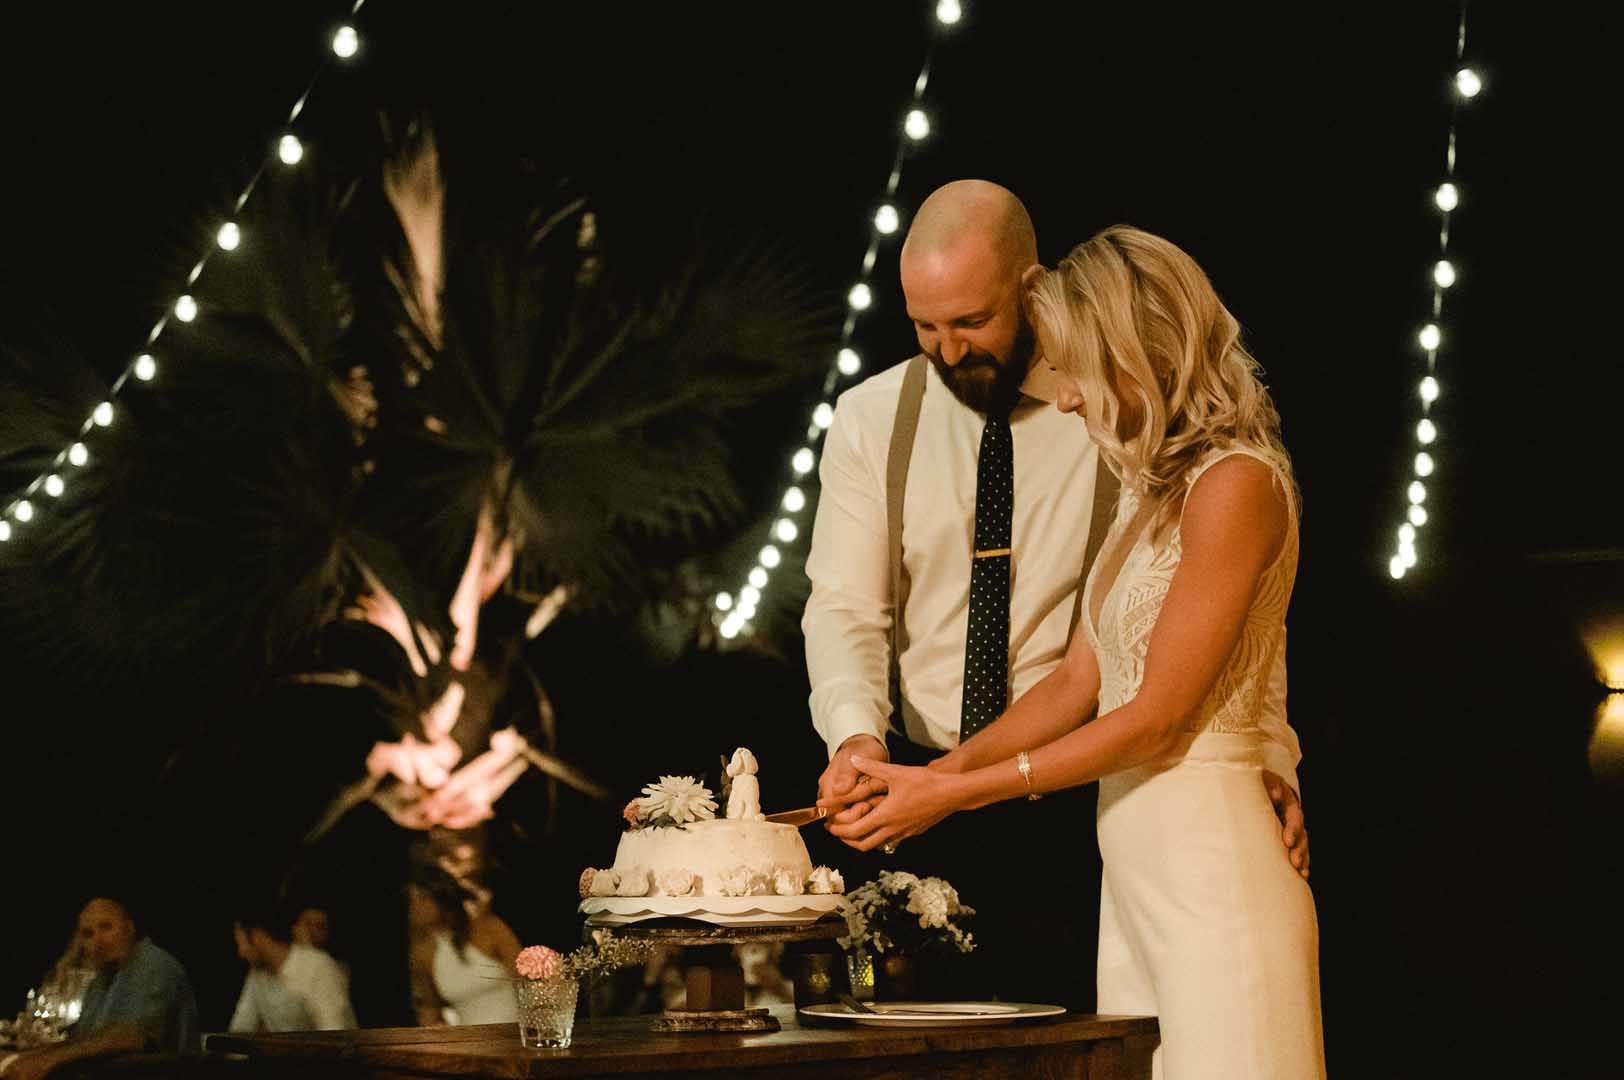 Married-Couple-Cutting-the-Cake